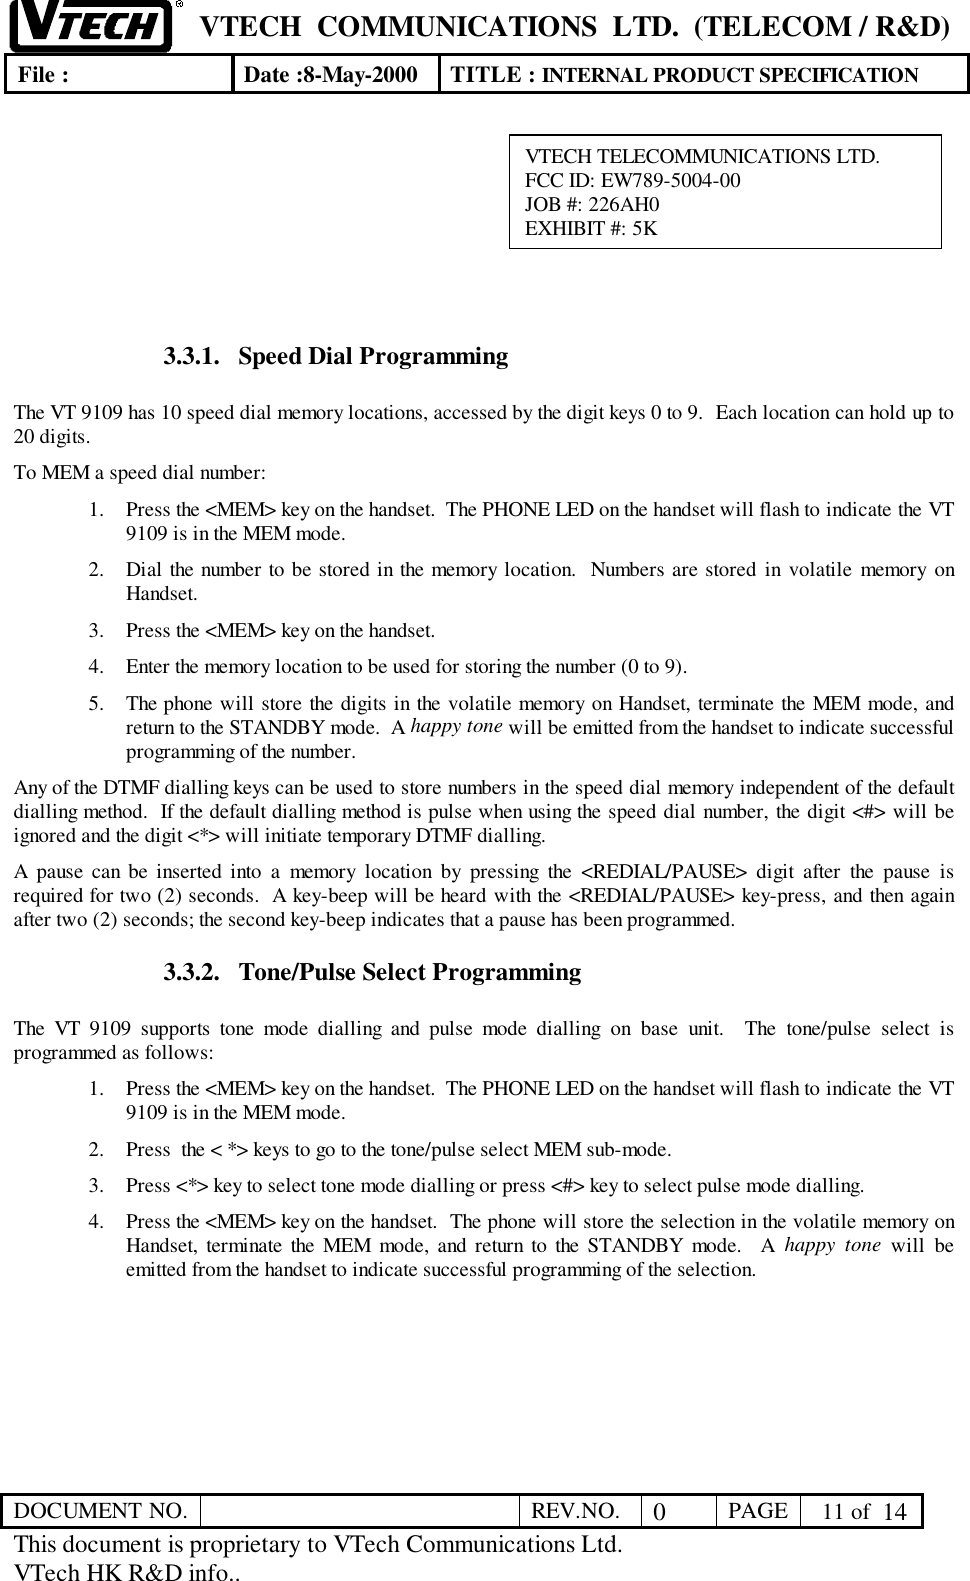 VTECH  COMMUNICATIONS  LTD.  (TELECOM / R&amp;D)File : Date :8-May-2000 TITLE : INTERNAL PRODUCT SPECIFICATIONDOCUMENT NO. REV.NO. 0PAGE  11 of  14This document is proprietary to VTech Communications Ltd.VTech HK R&amp;D info..3.3.1. Speed Dial ProgrammingThe VT 9109 has 10 speed dial memory locations, accessed by the digit keys 0 to 9.  Each location can hold up to20 digits.To MEM a speed dial number:1. Press the &lt;MEM&gt; key on the handset.  The PHONE LED on the handset will flash to indicate the VT9109 is in the MEM mode.2. Dial the number to be stored in the memory location.  Numbers are stored in volatile memory onHandset.3. Press the &lt;MEM&gt; key on the handset.4. Enter the memory location to be used for storing the number (0 to 9).5. The phone will store the digits in the volatile memory on Handset, terminate the MEM mode, andreturn to the STANDBY mode.  A happy tone will be emitted from the handset to indicate successfulprogramming of the number.Any of the DTMF dialling keys can be used to store numbers in the speed dial memory independent of the defaultdialling method.  If the default dialling method is pulse when using the speed dial number, the digit &lt;#&gt; will beignored and the digit &lt;*&gt; will initiate temporary DTMF dialling.A pause can be inserted into a memory location by pressing the &lt;REDIAL/PAUSE&gt; digit after the pause isrequired for two (2) seconds.  A key-beep will be heard with the &lt;REDIAL/PAUSE&gt; key-press, and then againafter two (2) seconds; the second key-beep indicates that a pause has been programmed.3.3.2. Tone/Pulse Select ProgrammingThe VT 9109 supports tone mode dialling and pulse mode dialling on base unit.  The tone/pulse select isprogrammed as follows:1. Press the &lt;MEM&gt; key on the handset.  The PHONE LED on the handset will flash to indicate the VT9109 is in the MEM mode.2. Press  the &lt; *&gt; keys to go to the tone/pulse select MEM sub-mode.3. Press &lt;*&gt; key to select tone mode dialling or press &lt;#&gt; key to select pulse mode dialling.4. Press the &lt;MEM&gt; key on the handset.  The phone will store the selection in the volatile memory onHandset, terminate the MEM mode, and return to the STANDBY mode.  A happy tone will beemitted from the handset to indicate successful programming of the selection.VTECH TELECOMMUNICATIONS LTD.FCC ID: EW789-5004-00JOB #: 226AH0EXHIBIT #: 5K